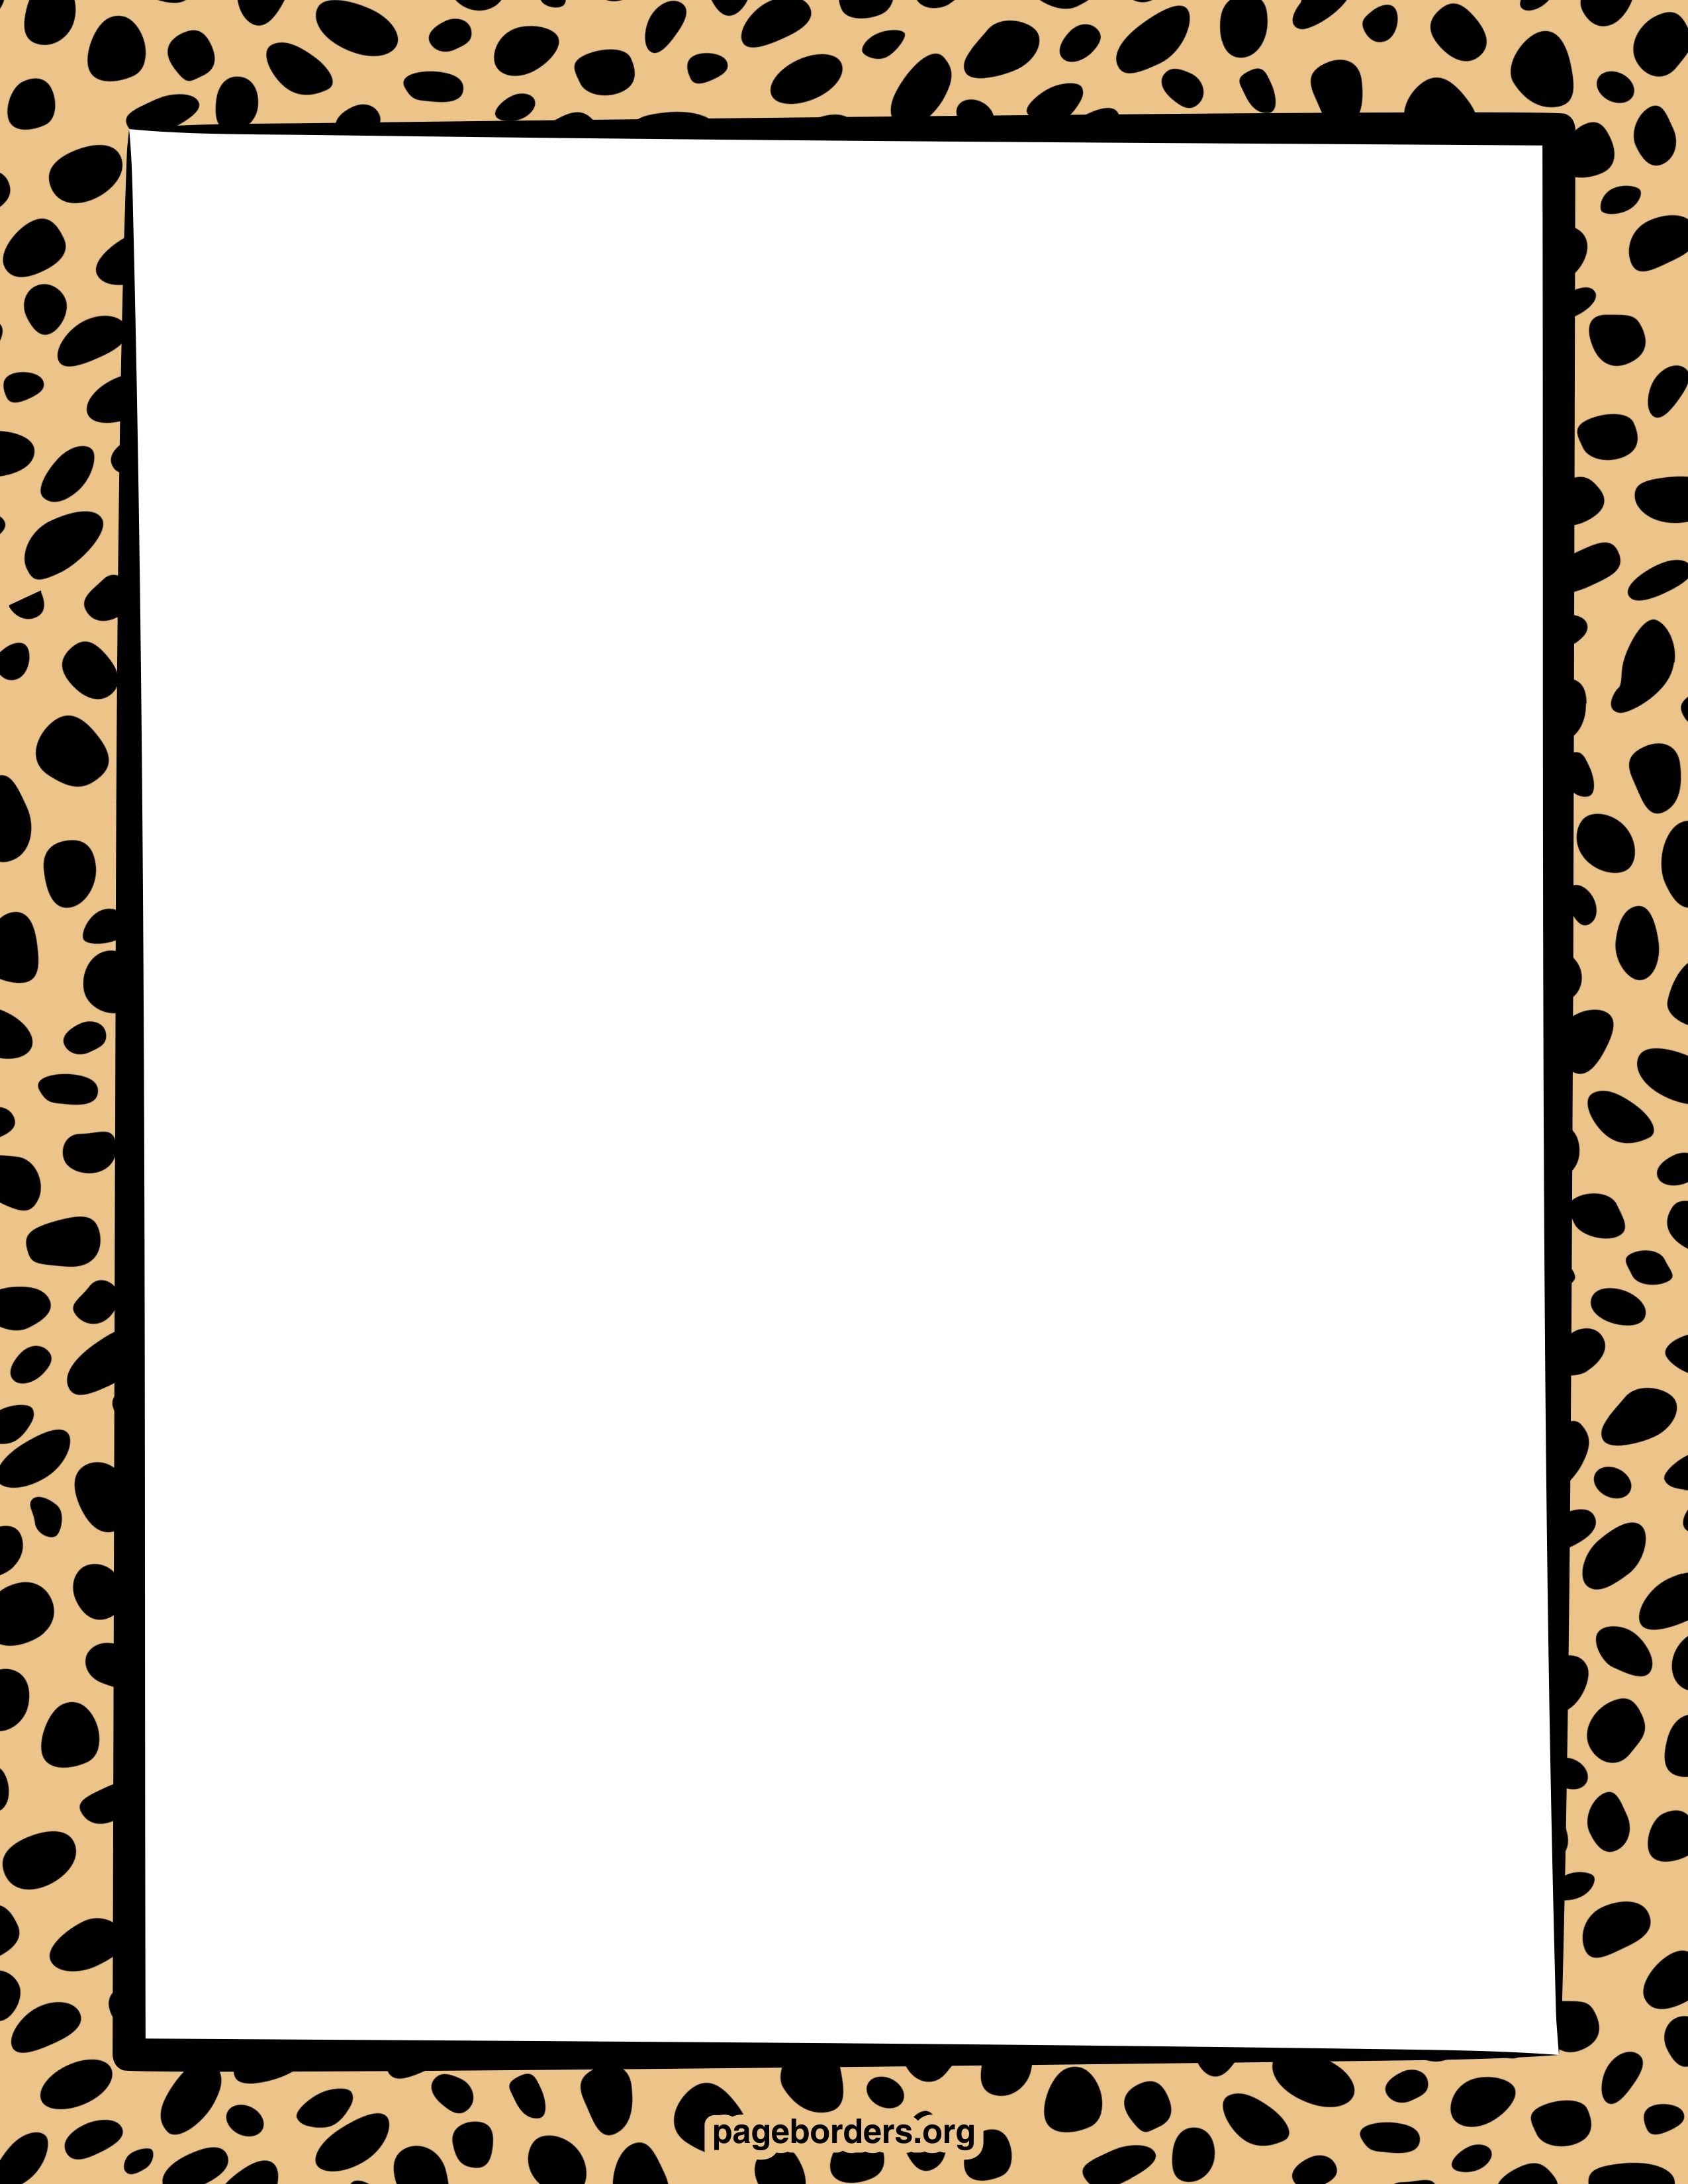 Camo Border Clip Art Free Clipart Download For Camouflage Template.